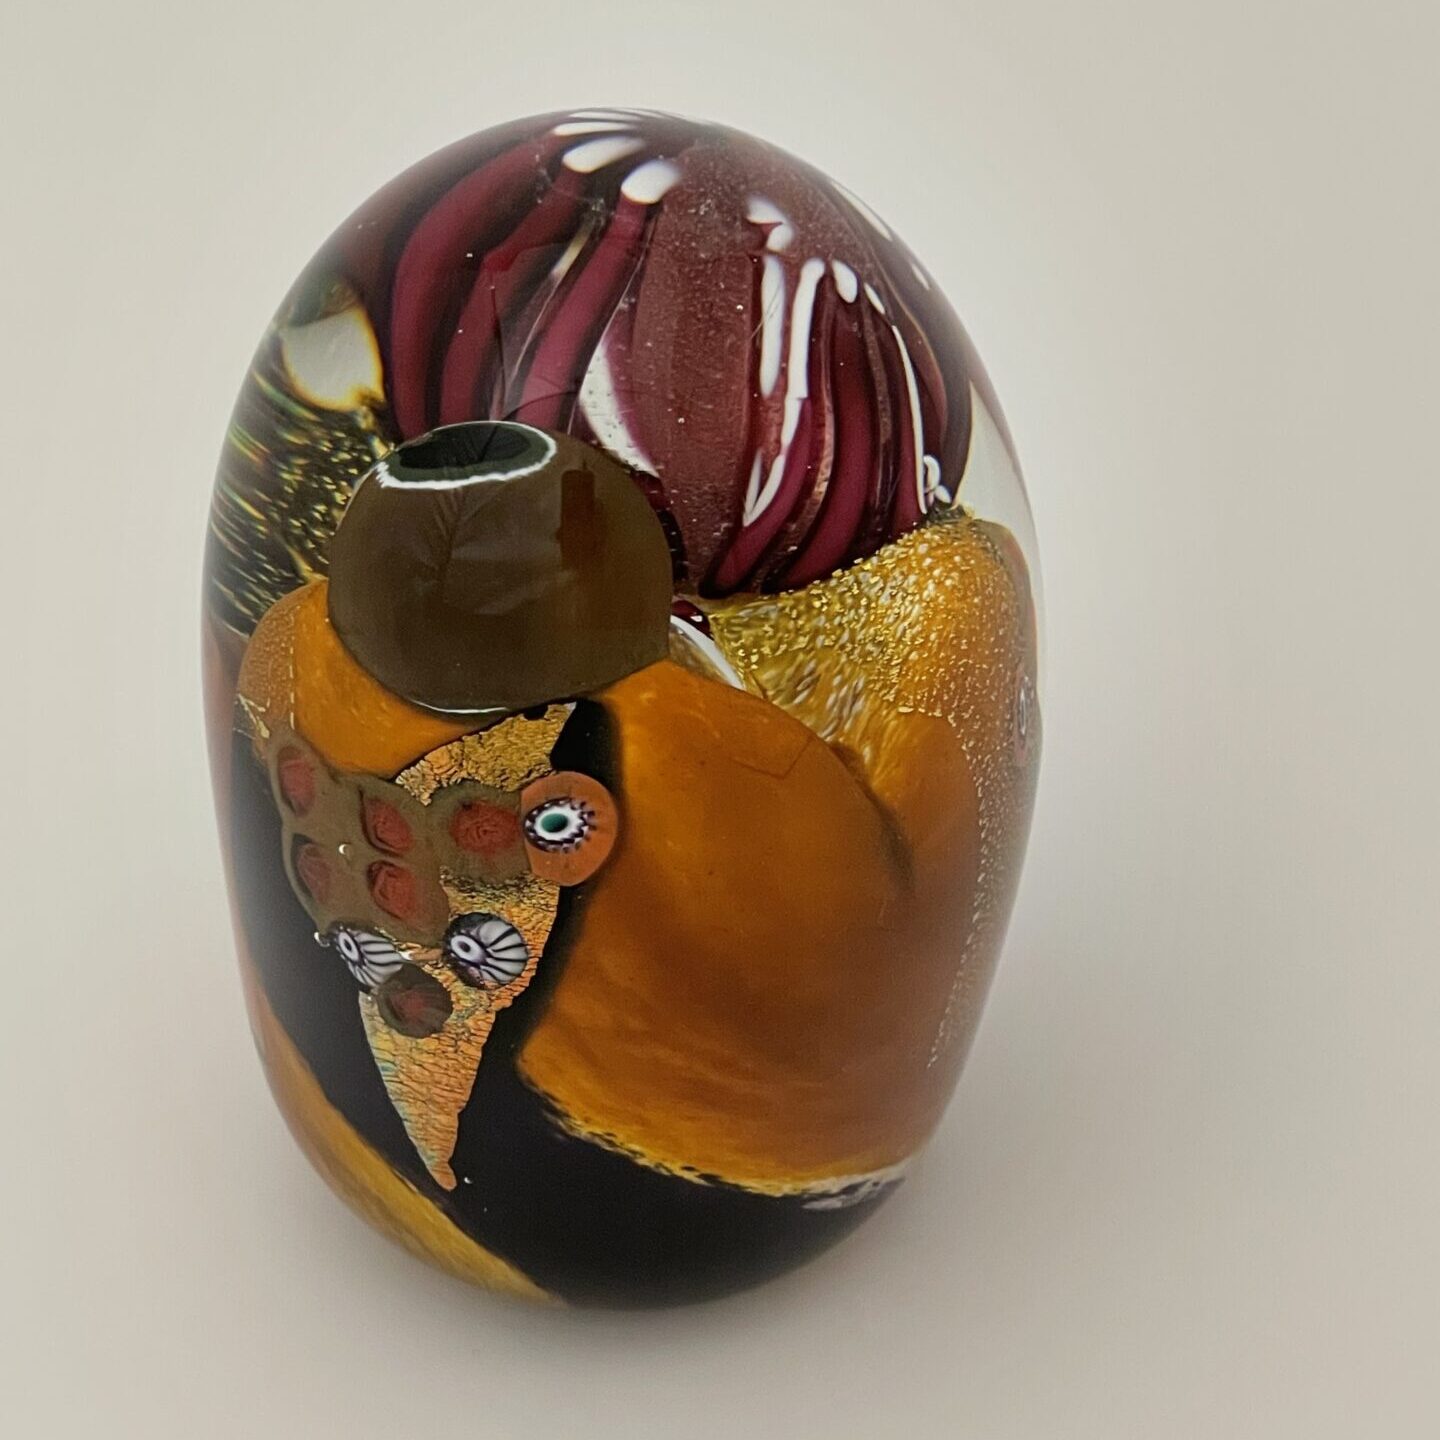 A paperweight by Barry Davis and Collette Fortin from their Coral Reef Series